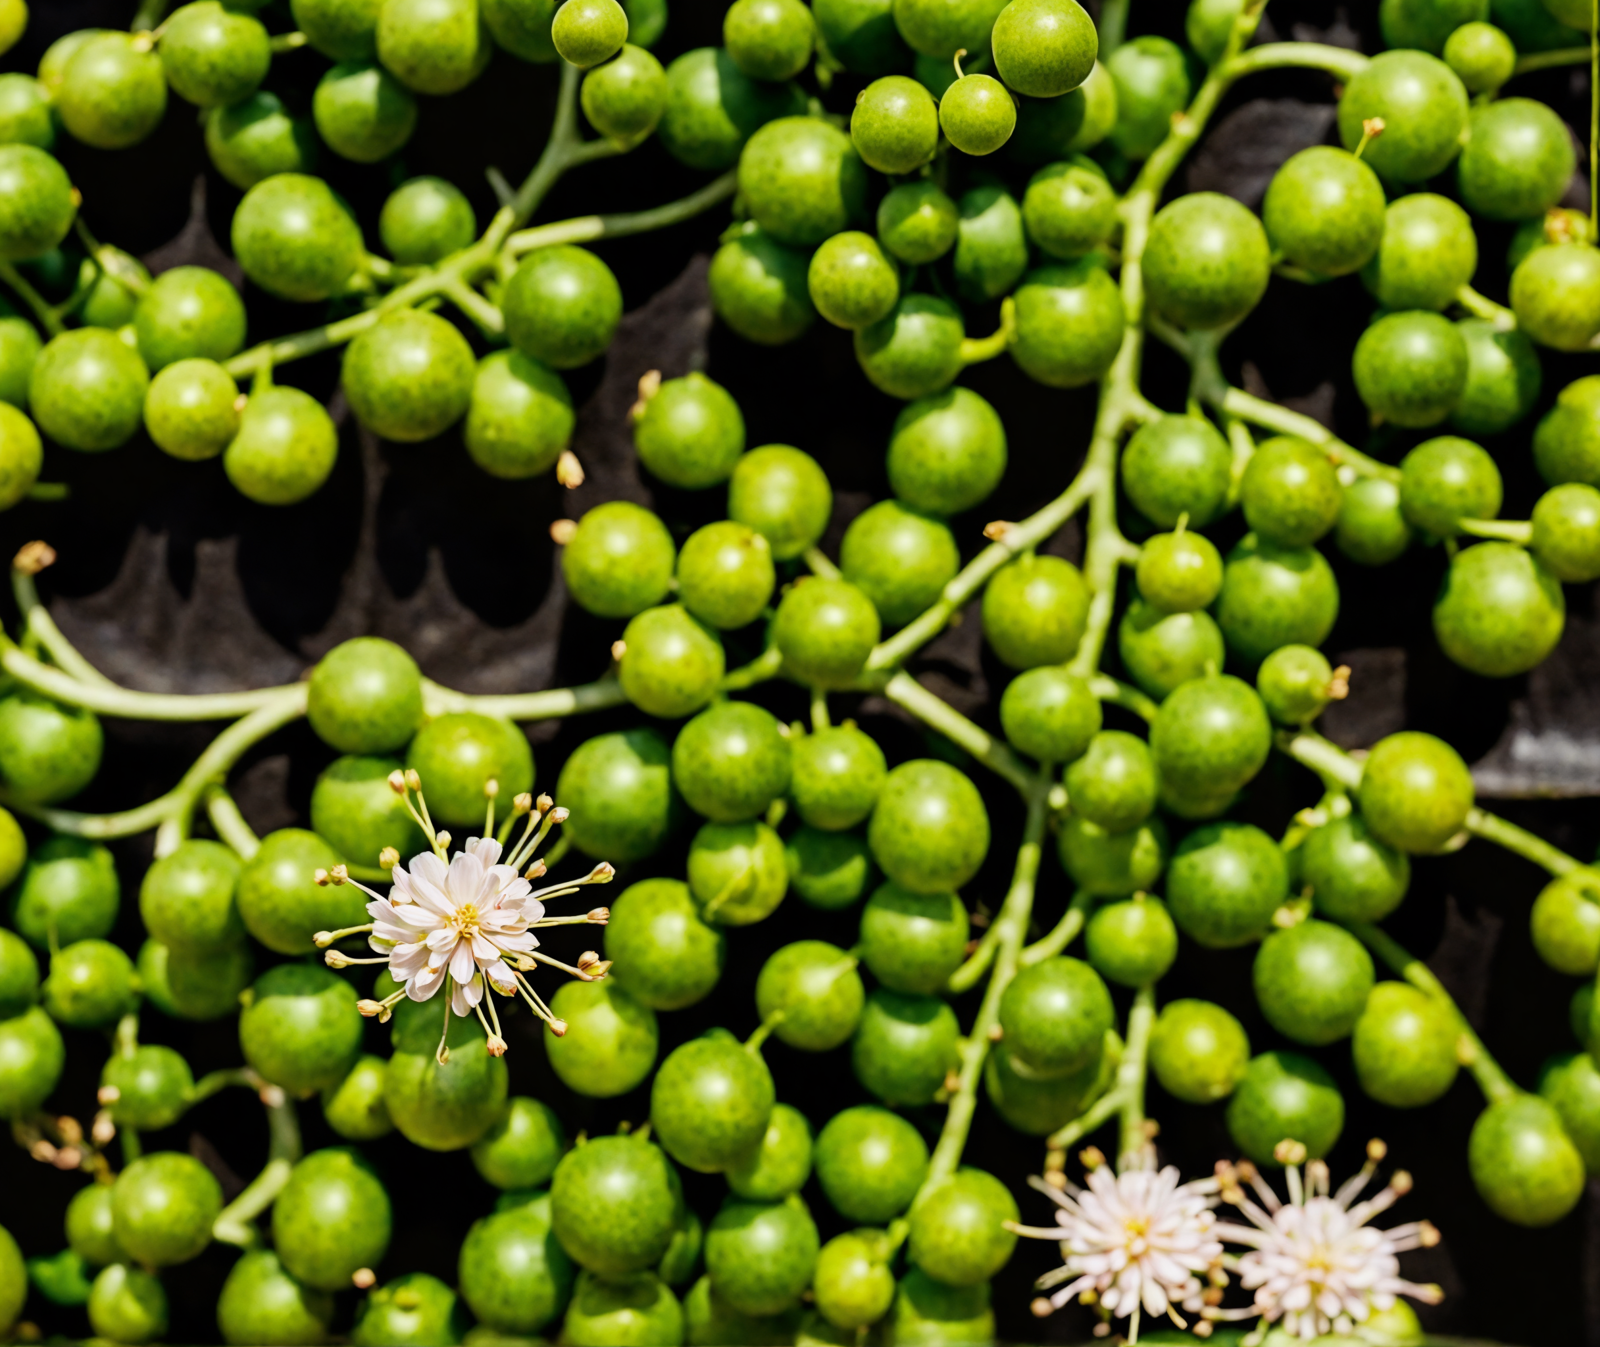 Curio rowleyanus (String of Pearls) in a planter, with round leaves resembling green beads, against a dark background.